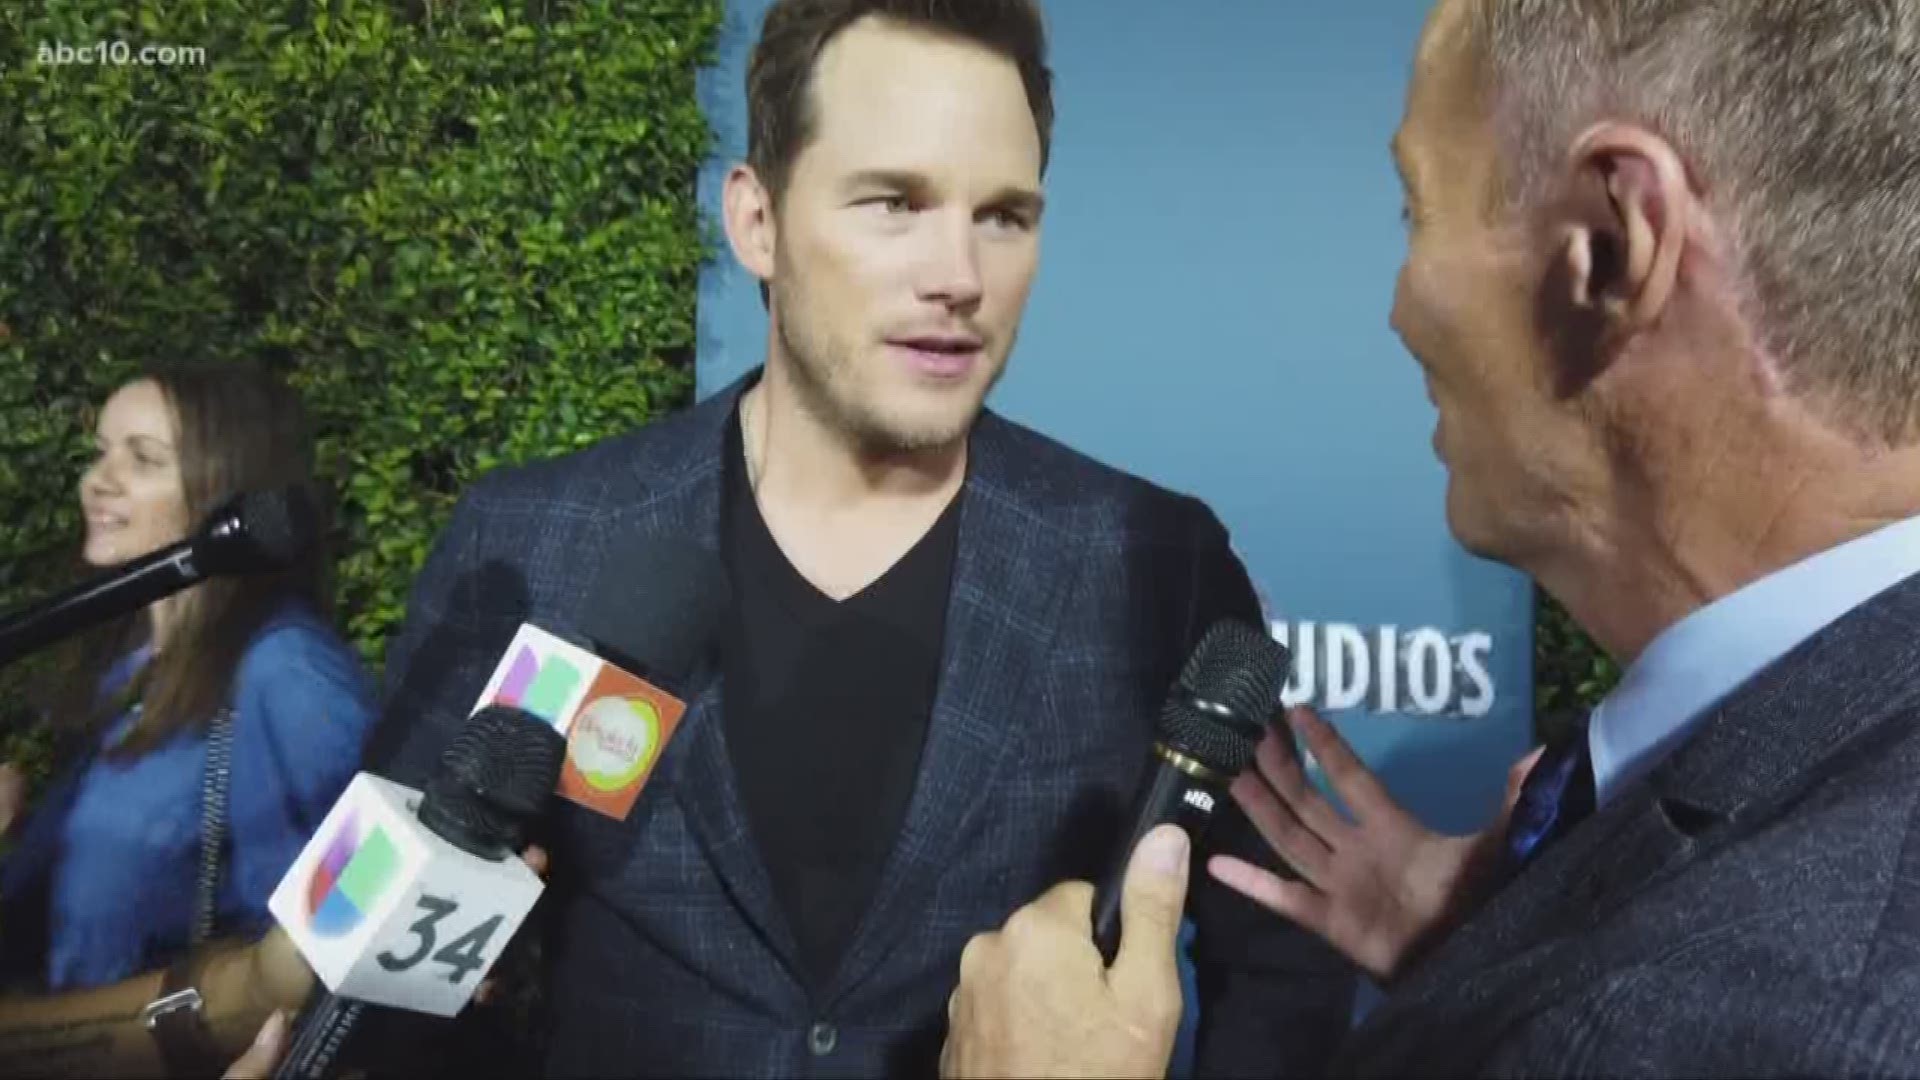 Chris Pratt and Bryce Dallas Howard talk with Mark S. Allen at the opening event for 'Jurassic World the Ride' at Universal Studios Hollywood. Also, a sneak peek at the ride.